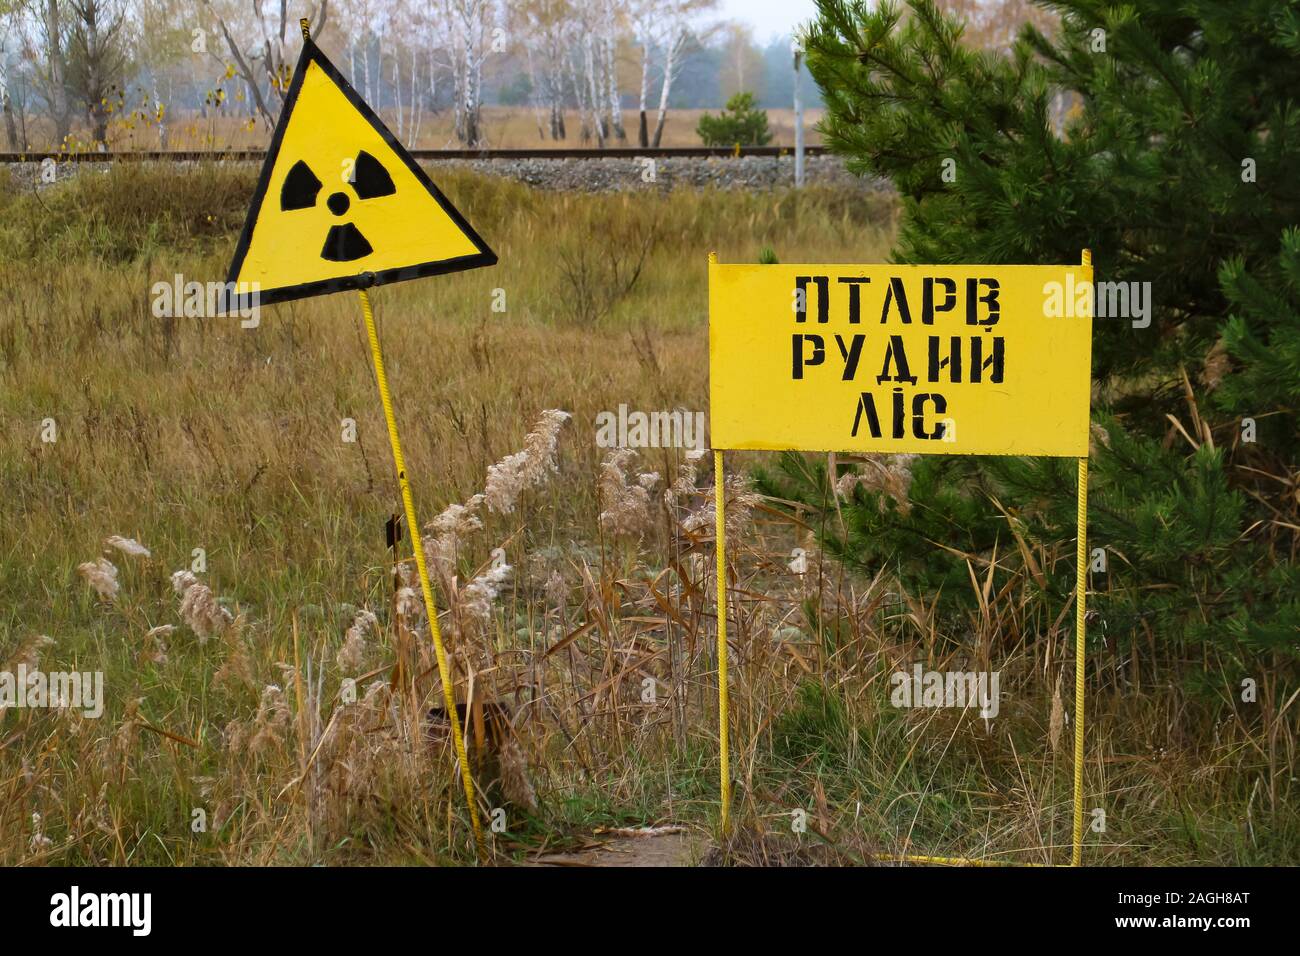 Yellow radiation warning signs in the wilderness near the Pripyat town sign in the Chernobyl exclusion zone, Ukraine. Stock Photo